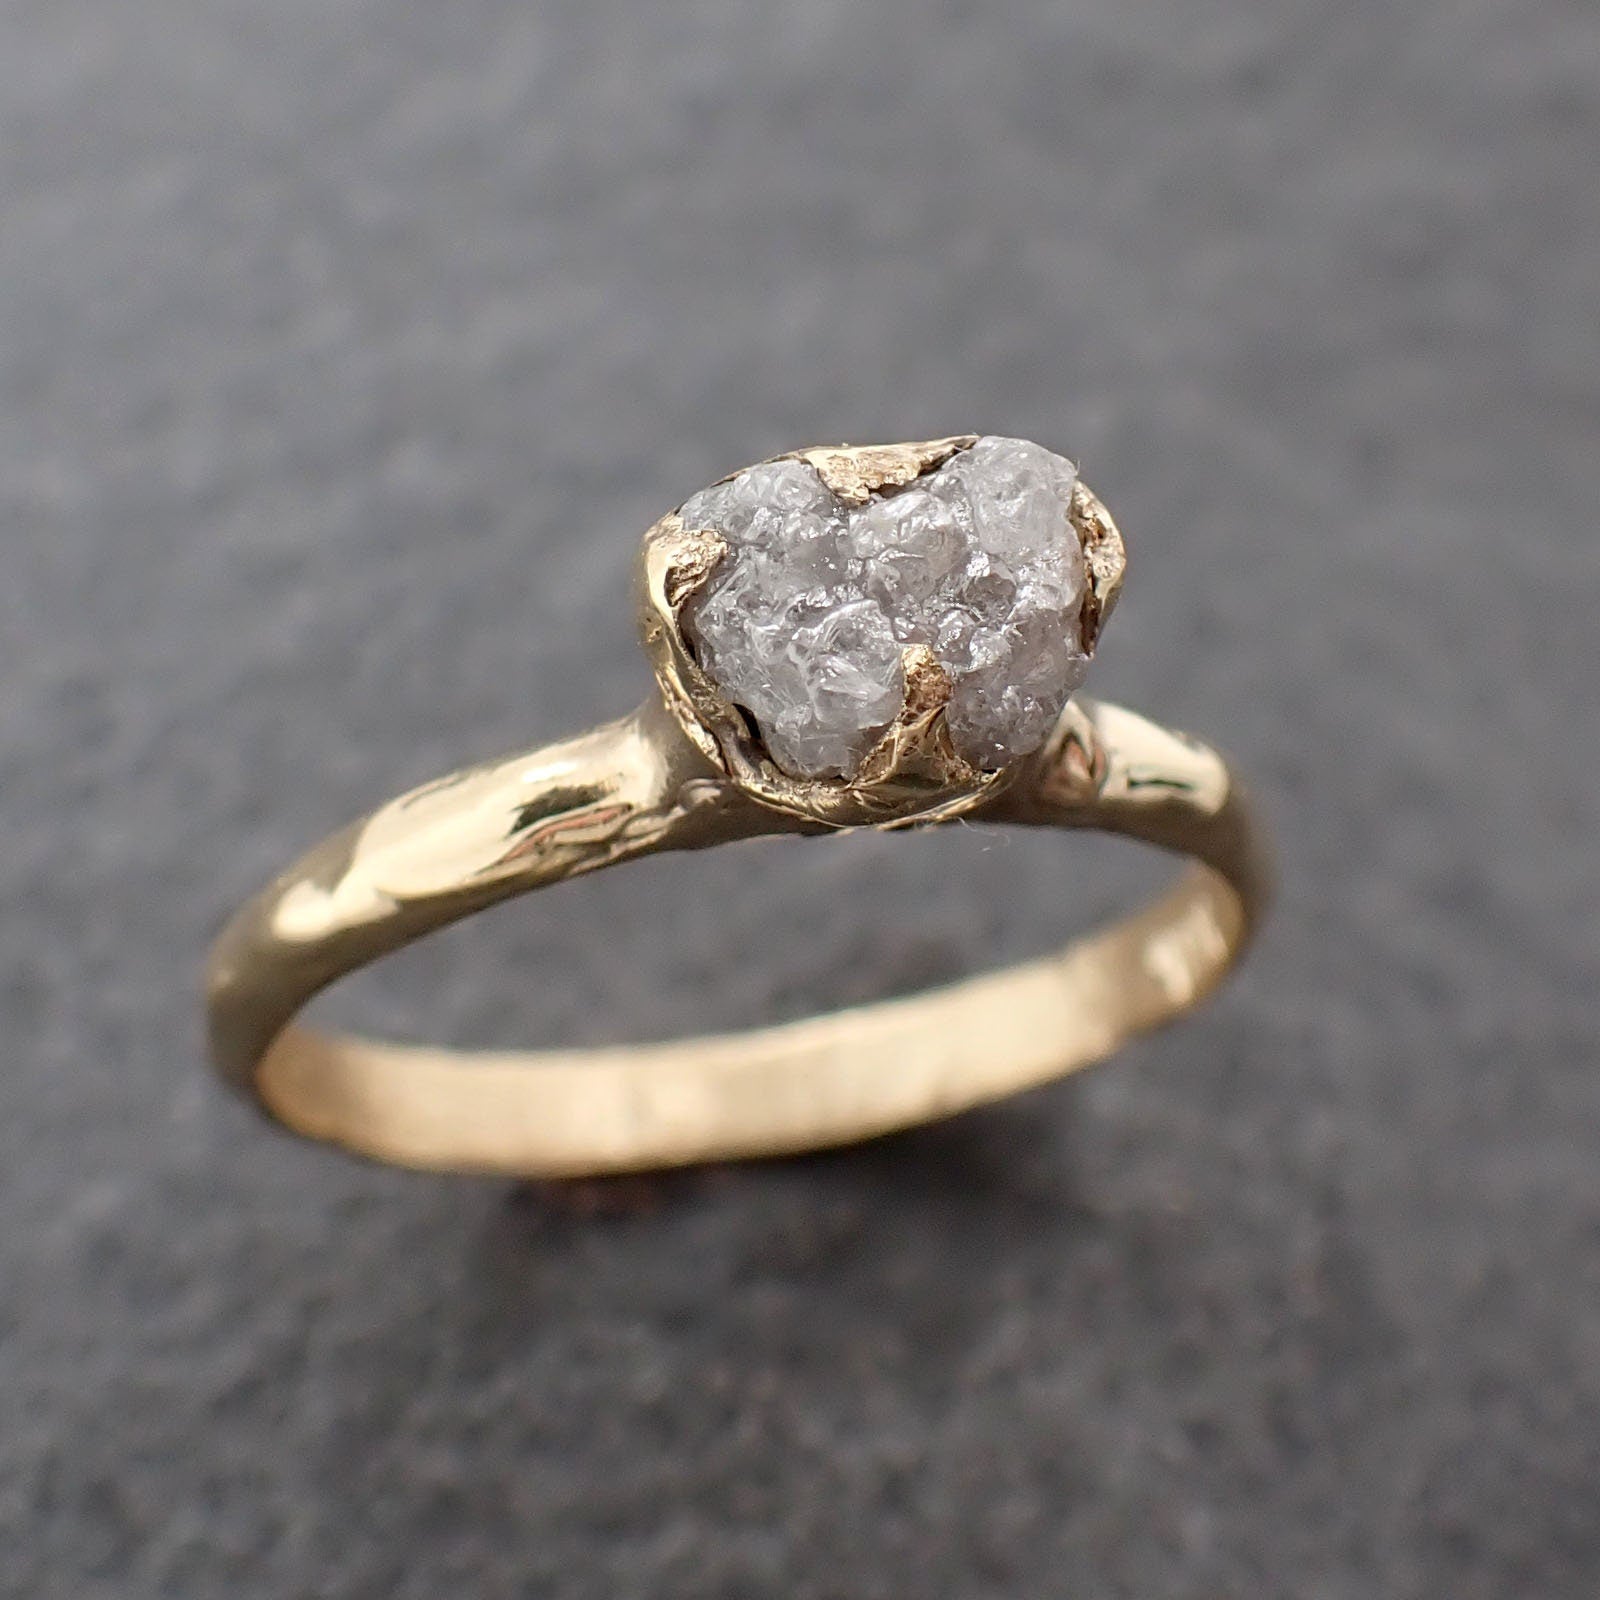 Raw Diamond Engagement Ring Rough Uncut Diamond Solitaire Recycled 14k yellow gold Conflict Free Diamond Wedding Promise 3077